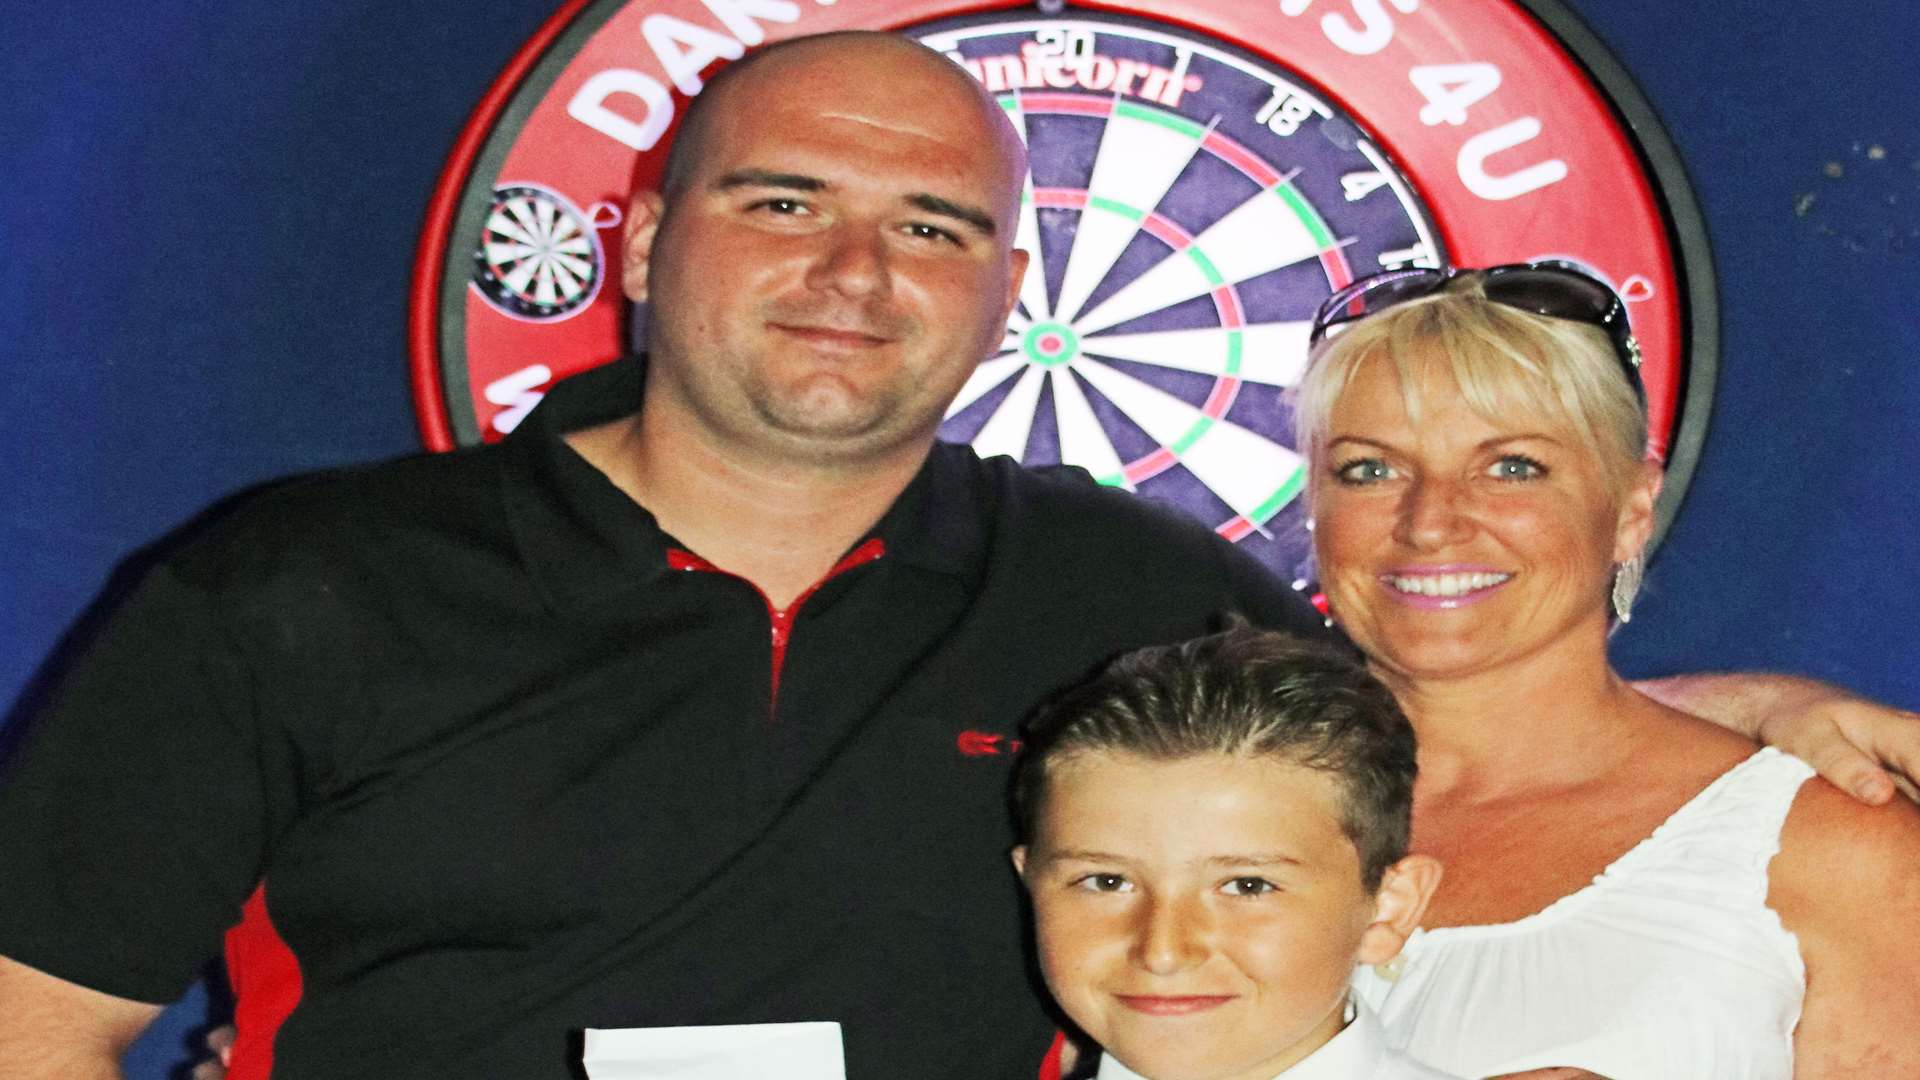 Rob Cross, left, pictured with Merlins Entertainment's Lee Dunn and her nephew Gary after winning the Sheppey Darts Classic in June Picture: Tony Cox